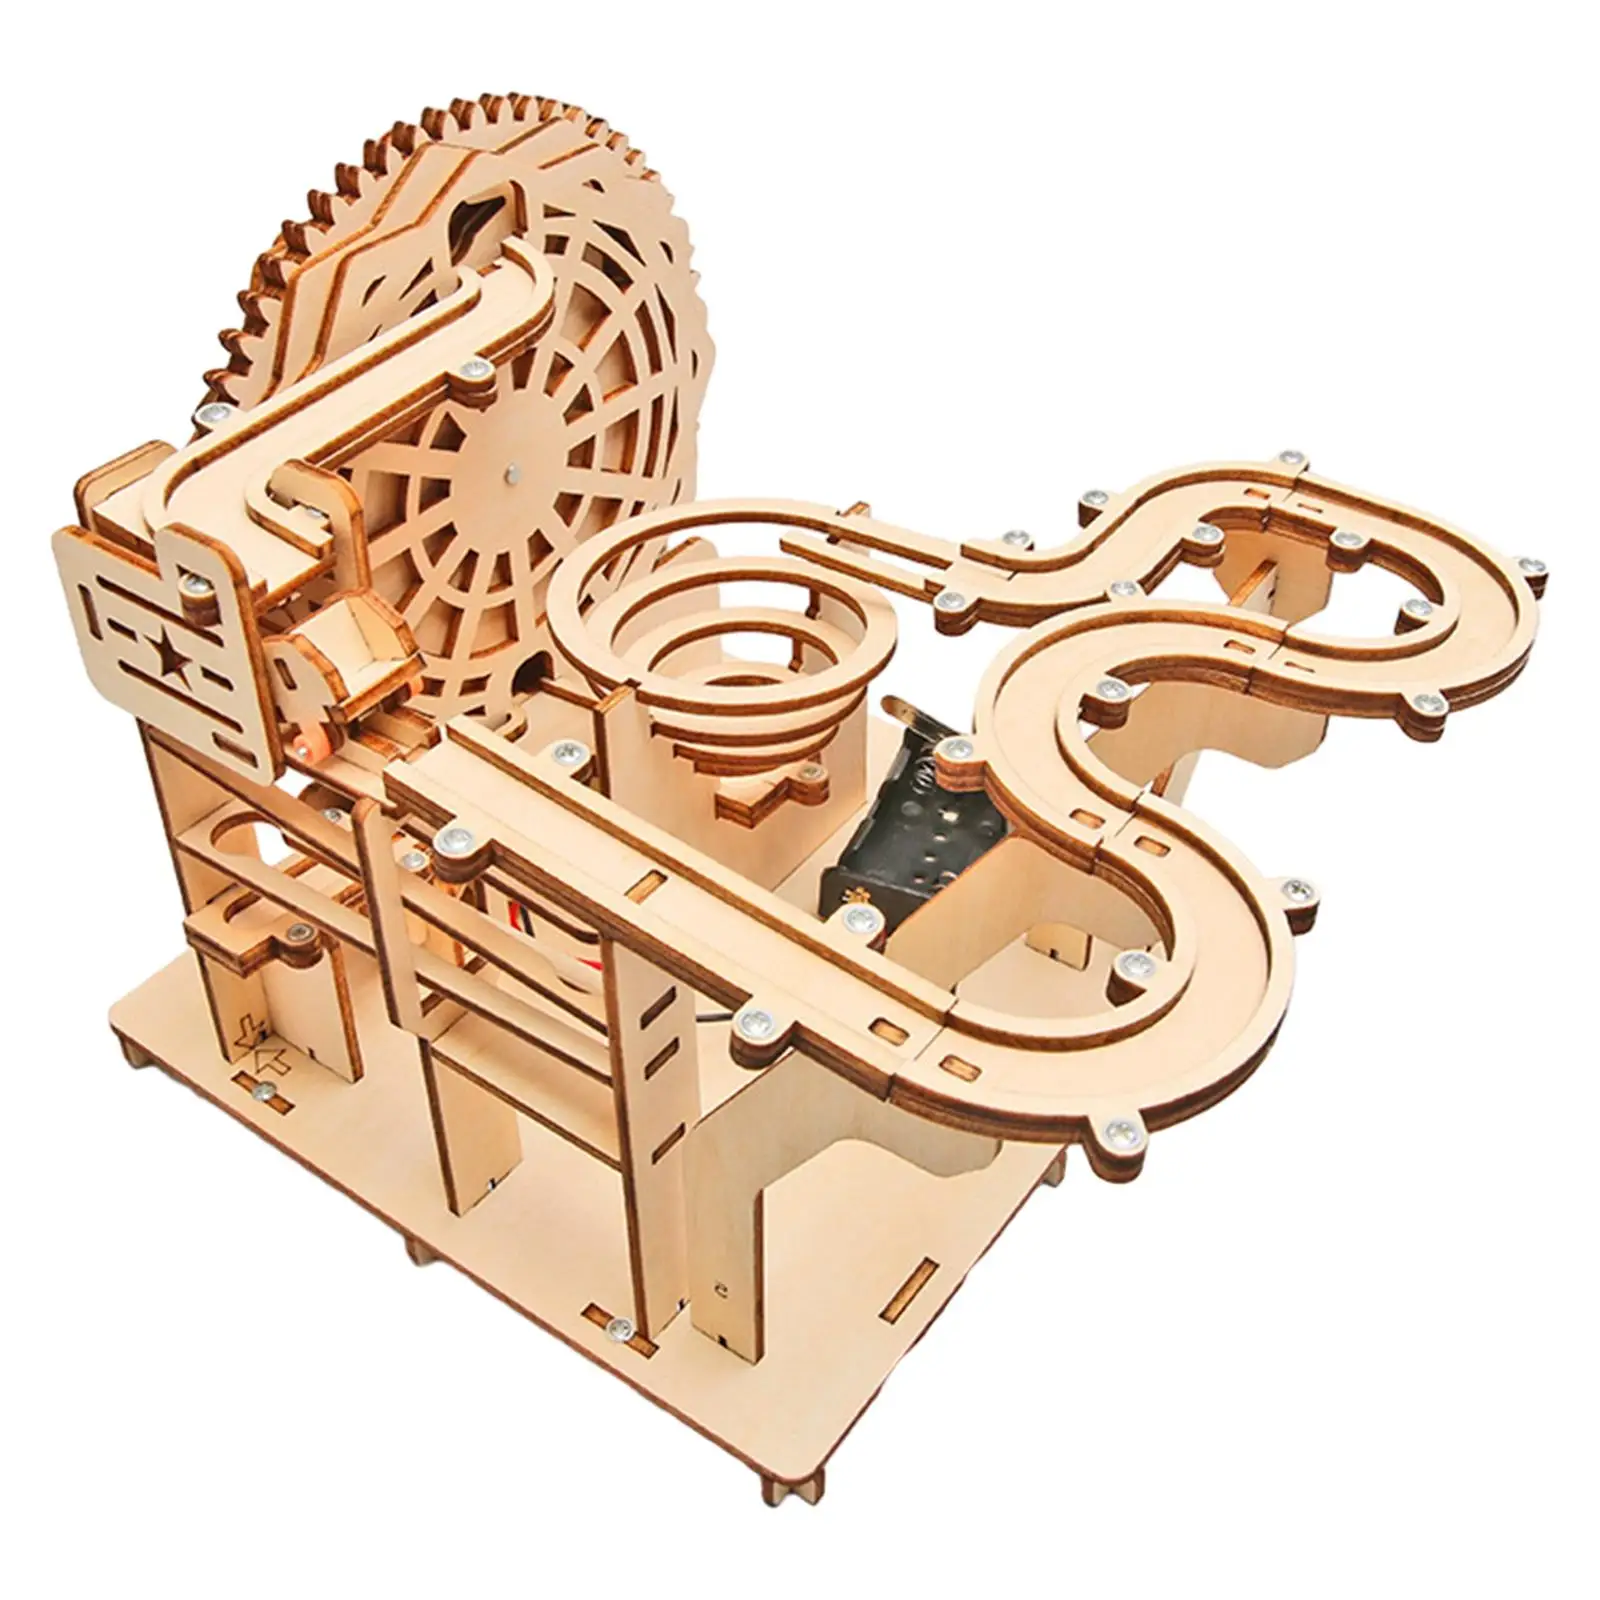 

Marble Run Model Building Kits Electrical 3D Wooden Puzzle Wooden Craft for Gift Home Ornament Holiday Room Decor Teens Adults